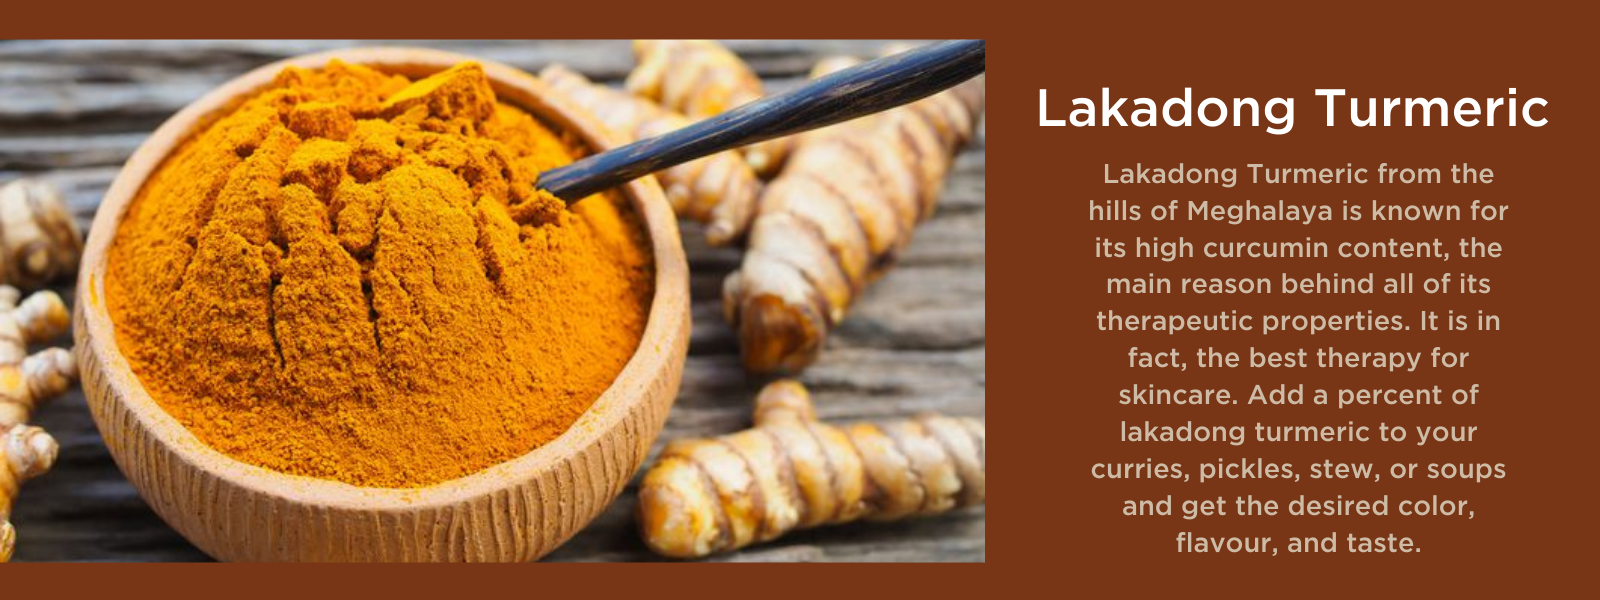 Lakadong Turmeric - Health Benefits, Uses and Important Facts